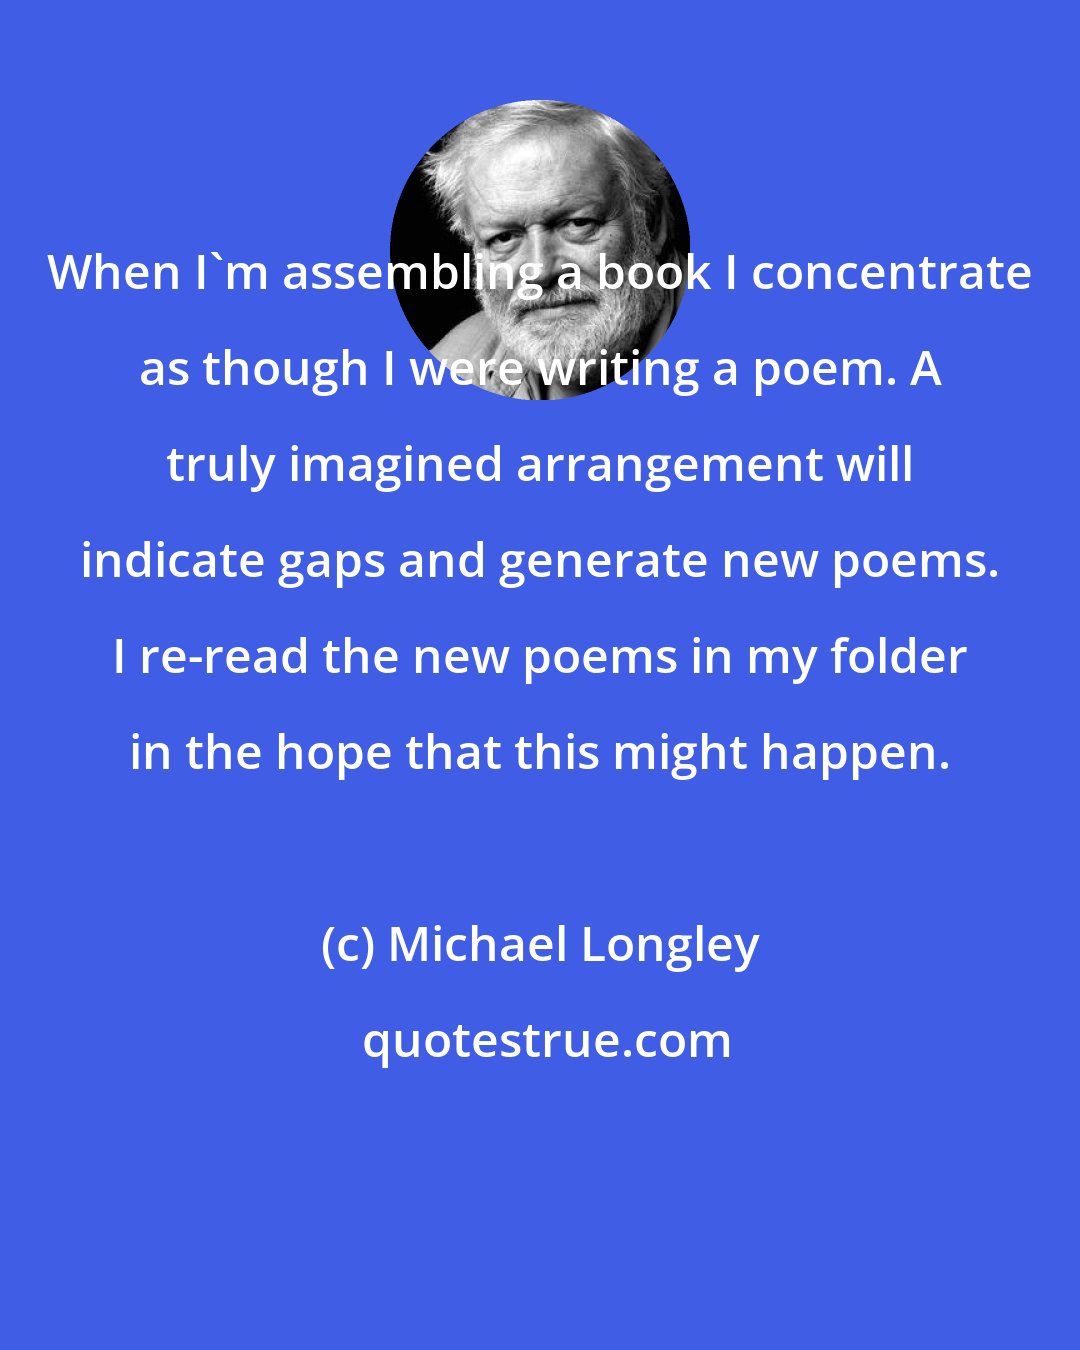 Michael Longley: When I'm assembling a book I concentrate as though I were writing a poem. A truly imagined arrangement will indicate gaps and generate new poems. I re-read the new poems in my folder in the hope that this might happen.